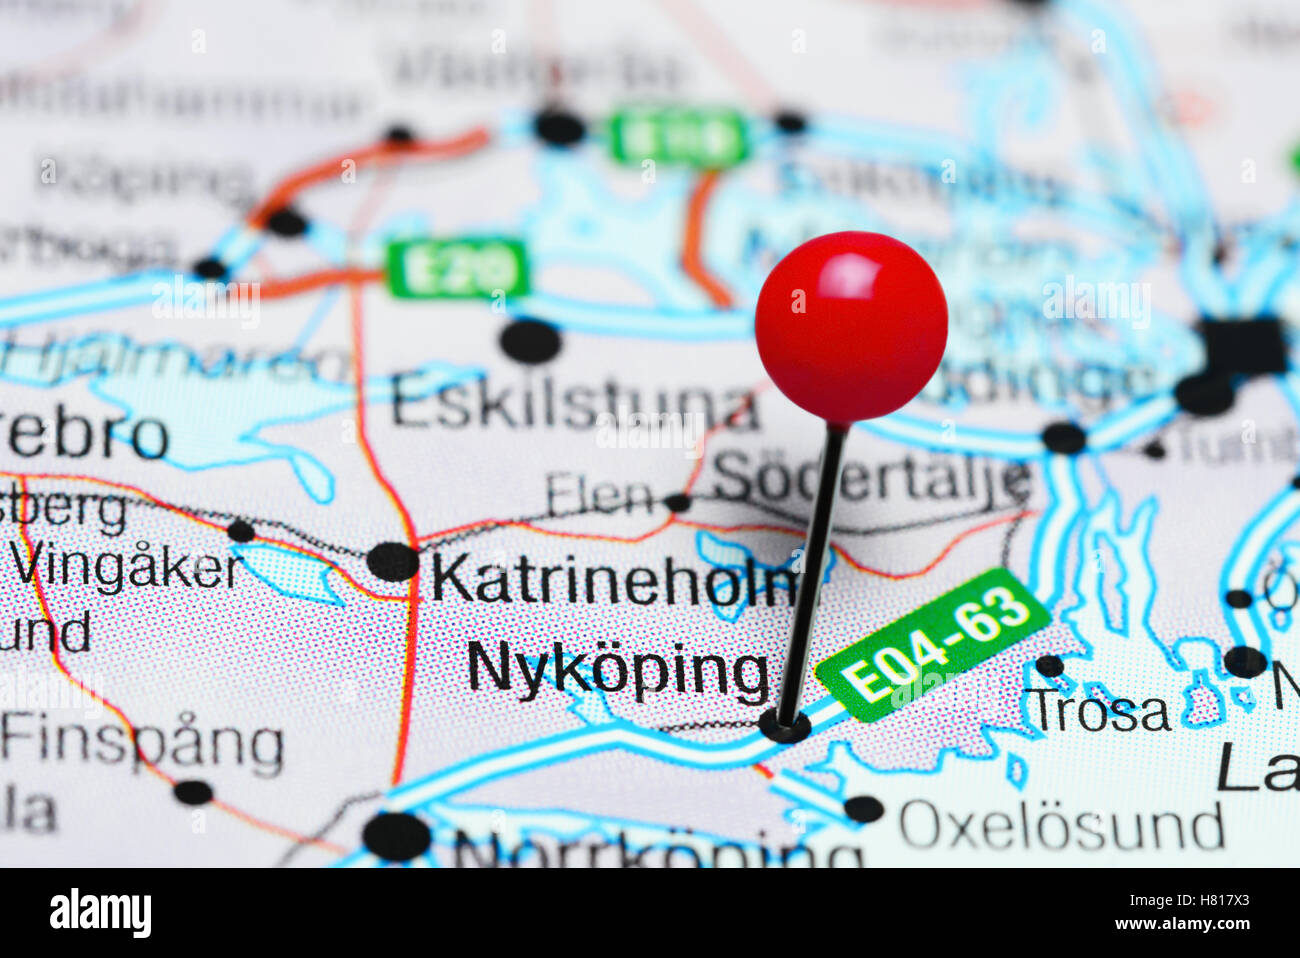 Nykoping pinned on a map of Sweden Stock Photo